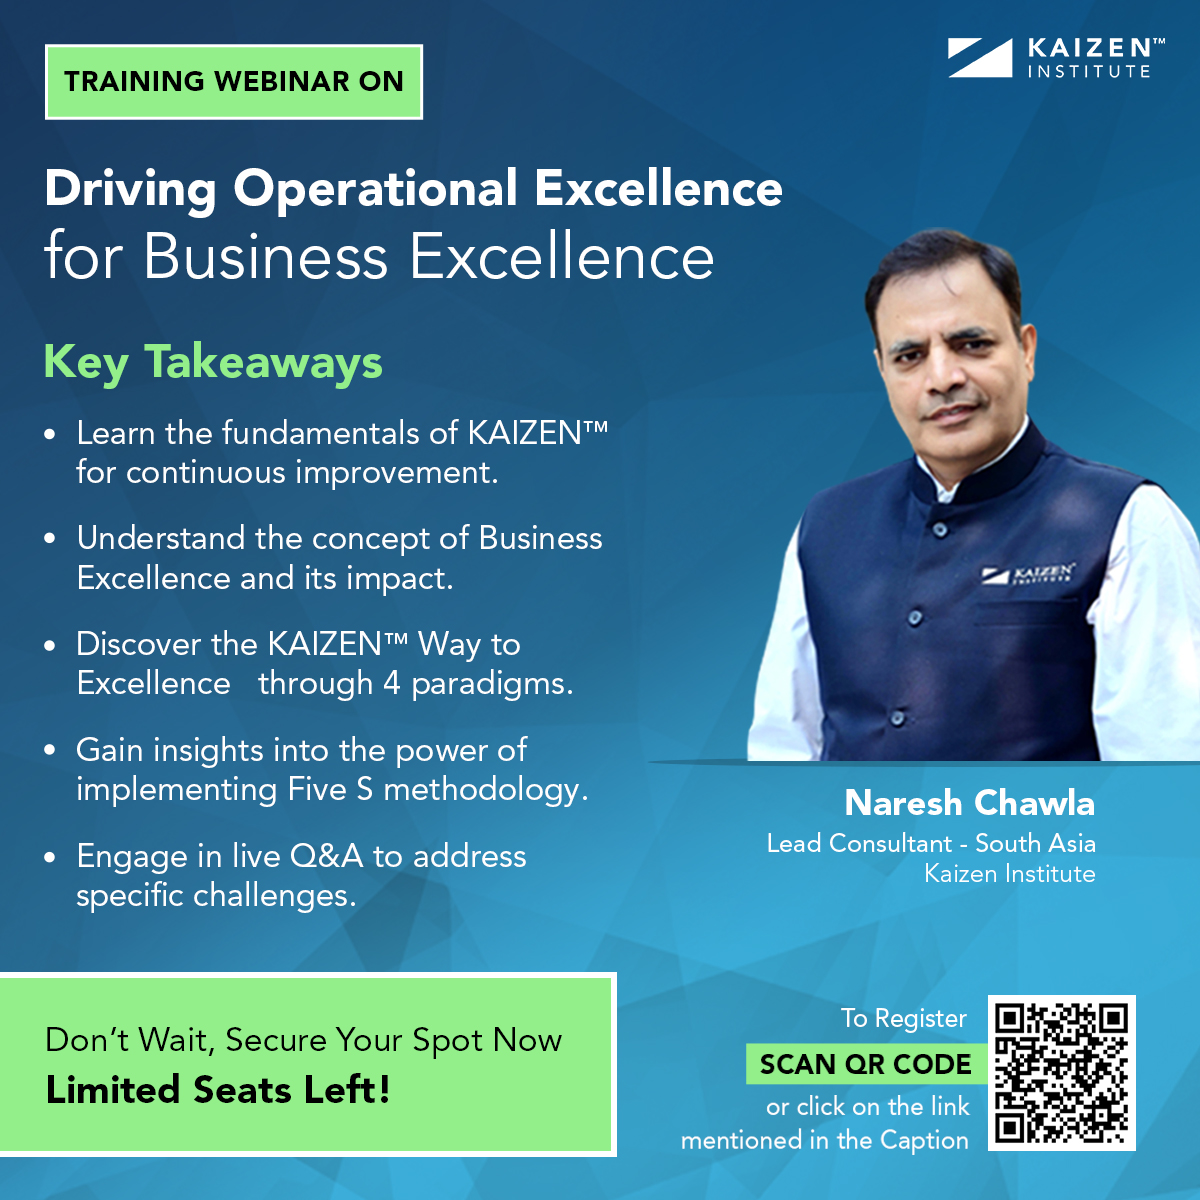 Driving Operational Excellence for Business Excellence 🌟
On June 26th, 2023, join us to uncover the secrets to continuous improvement, explore the path to Business Excellence.

Register Now: bit.ly/3CxIA6K

#KAIZEN™ #LEAN #OperationalExcellence #BusinessExcellence